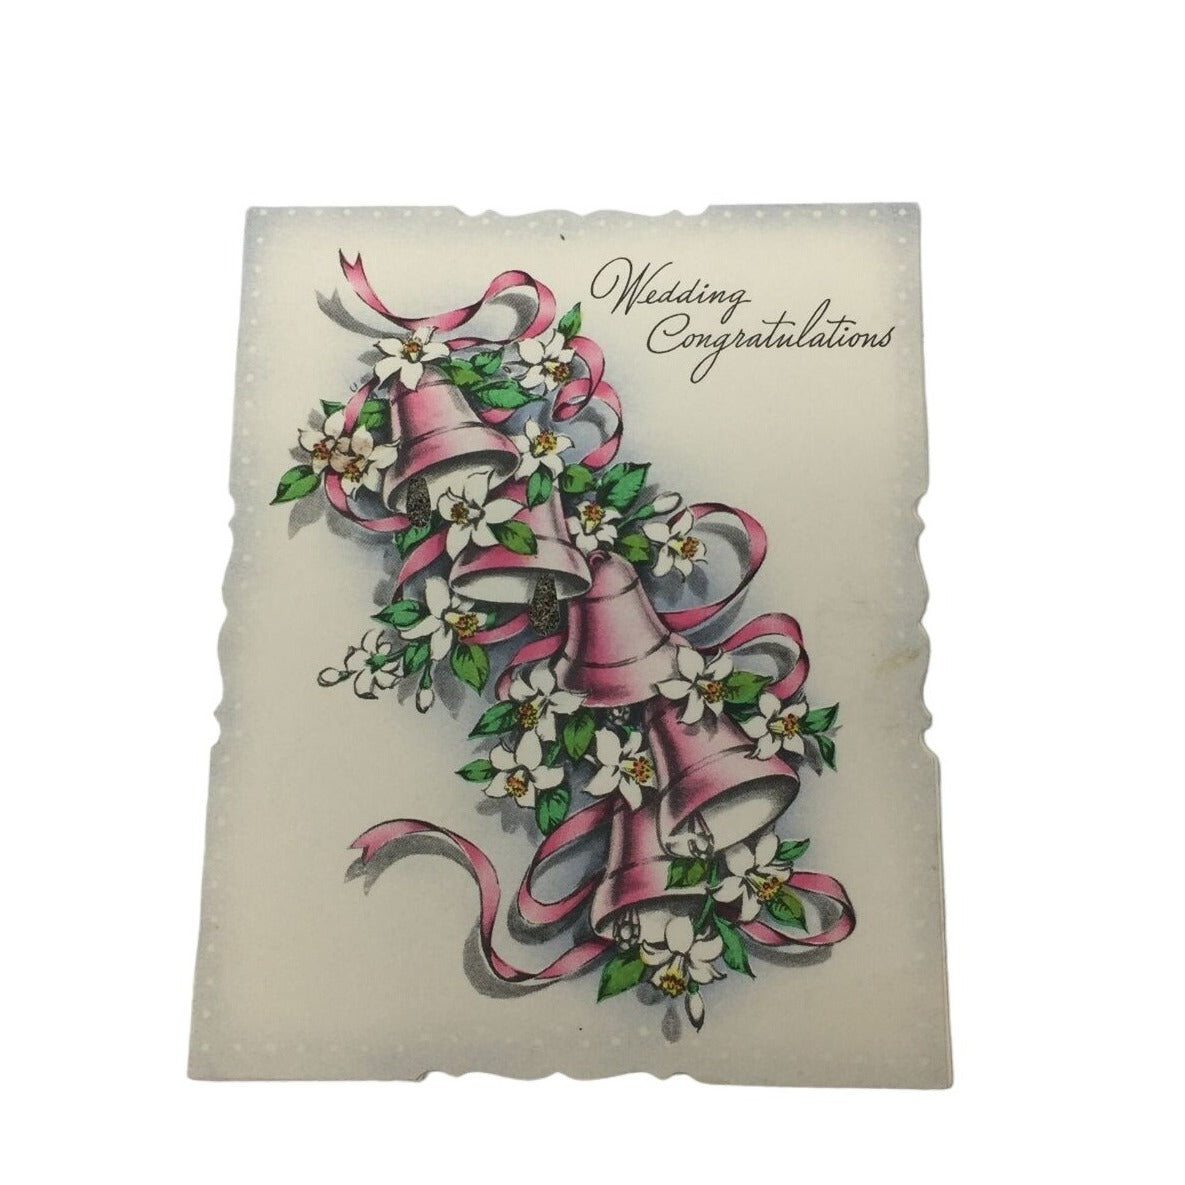 Vintage Wedding Congratulations Miniature Paper Card with Handwritting inside